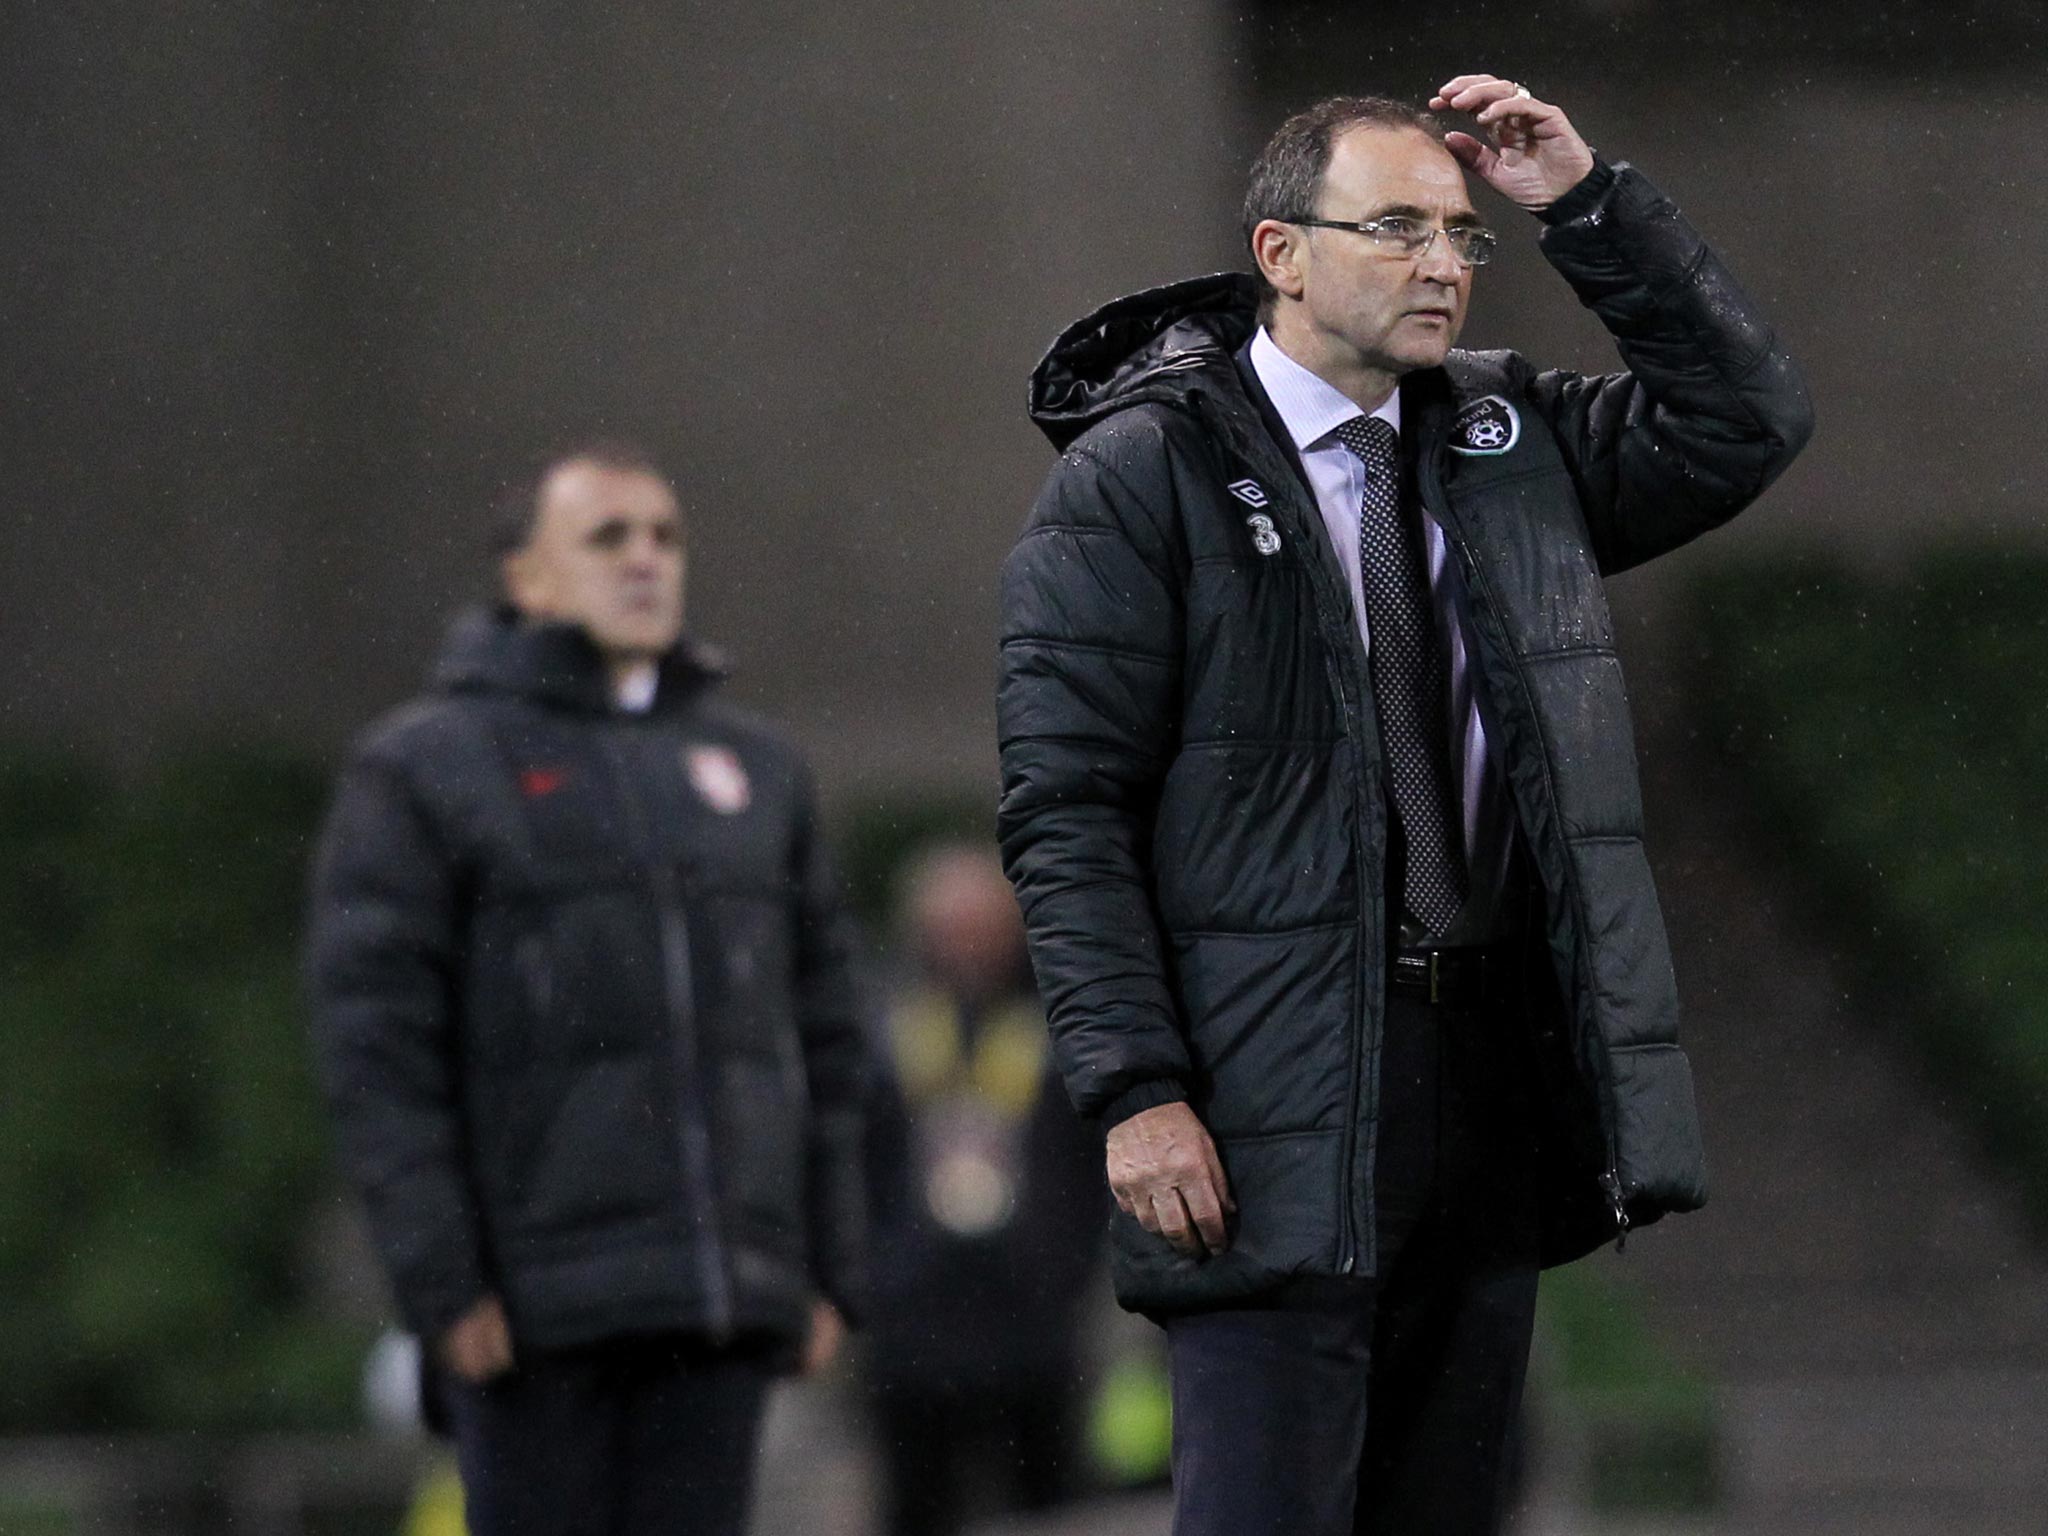 Republic of Ireland suffered their first defeat under manager Martin O'Neill in the 2-1 defeat to Serbia